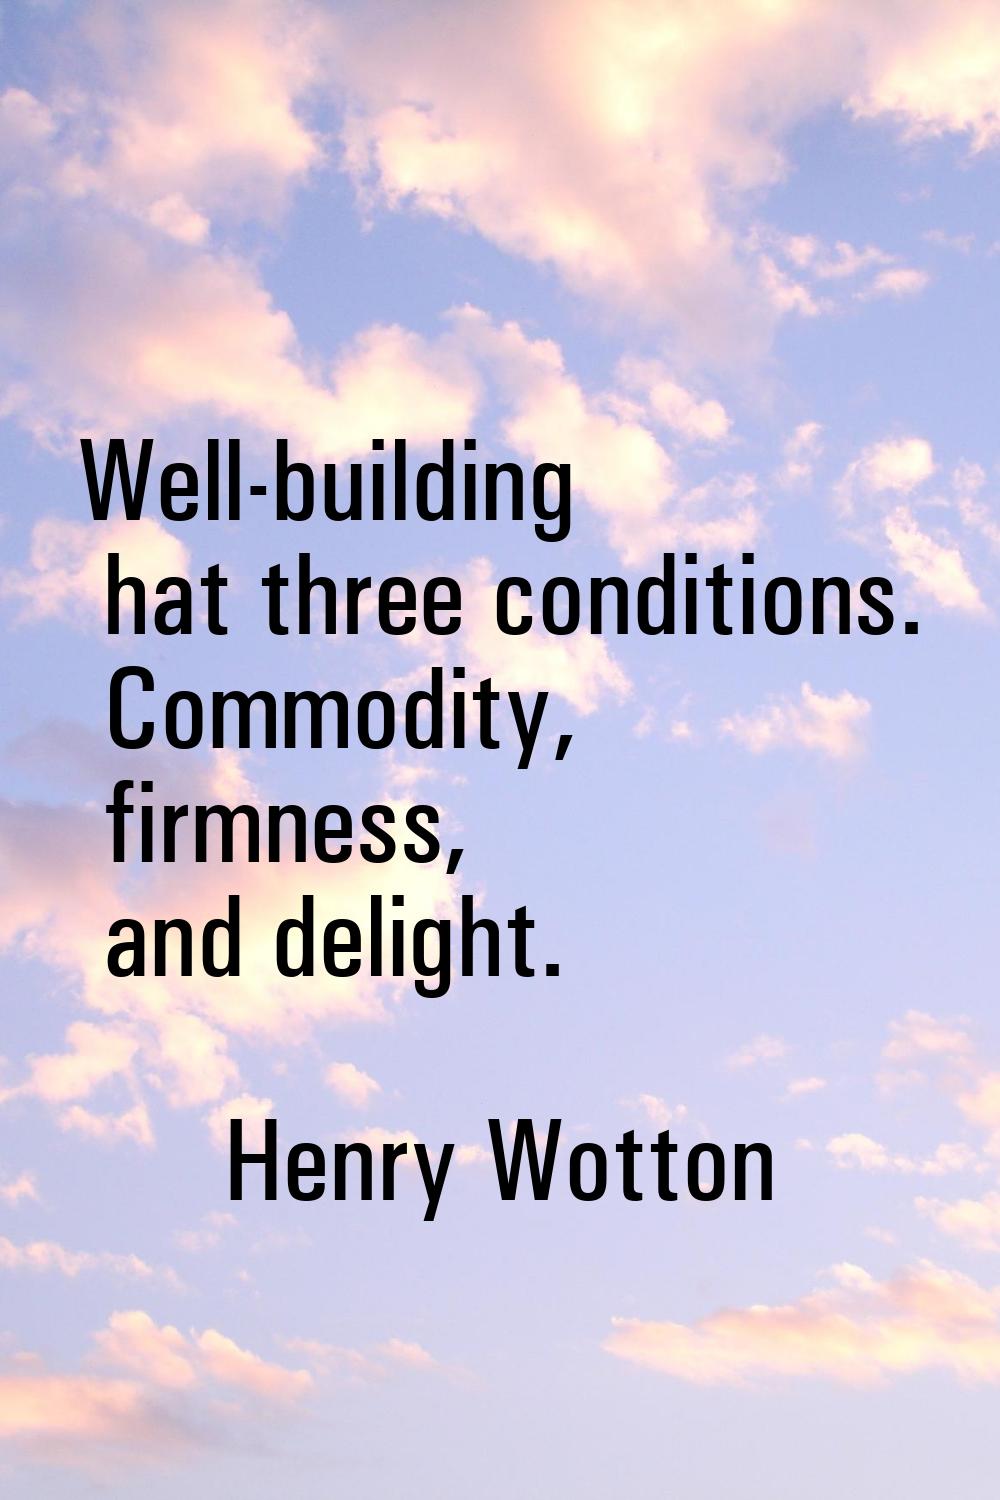 Well-building hat three conditions. Commodity, firmness, and delight.